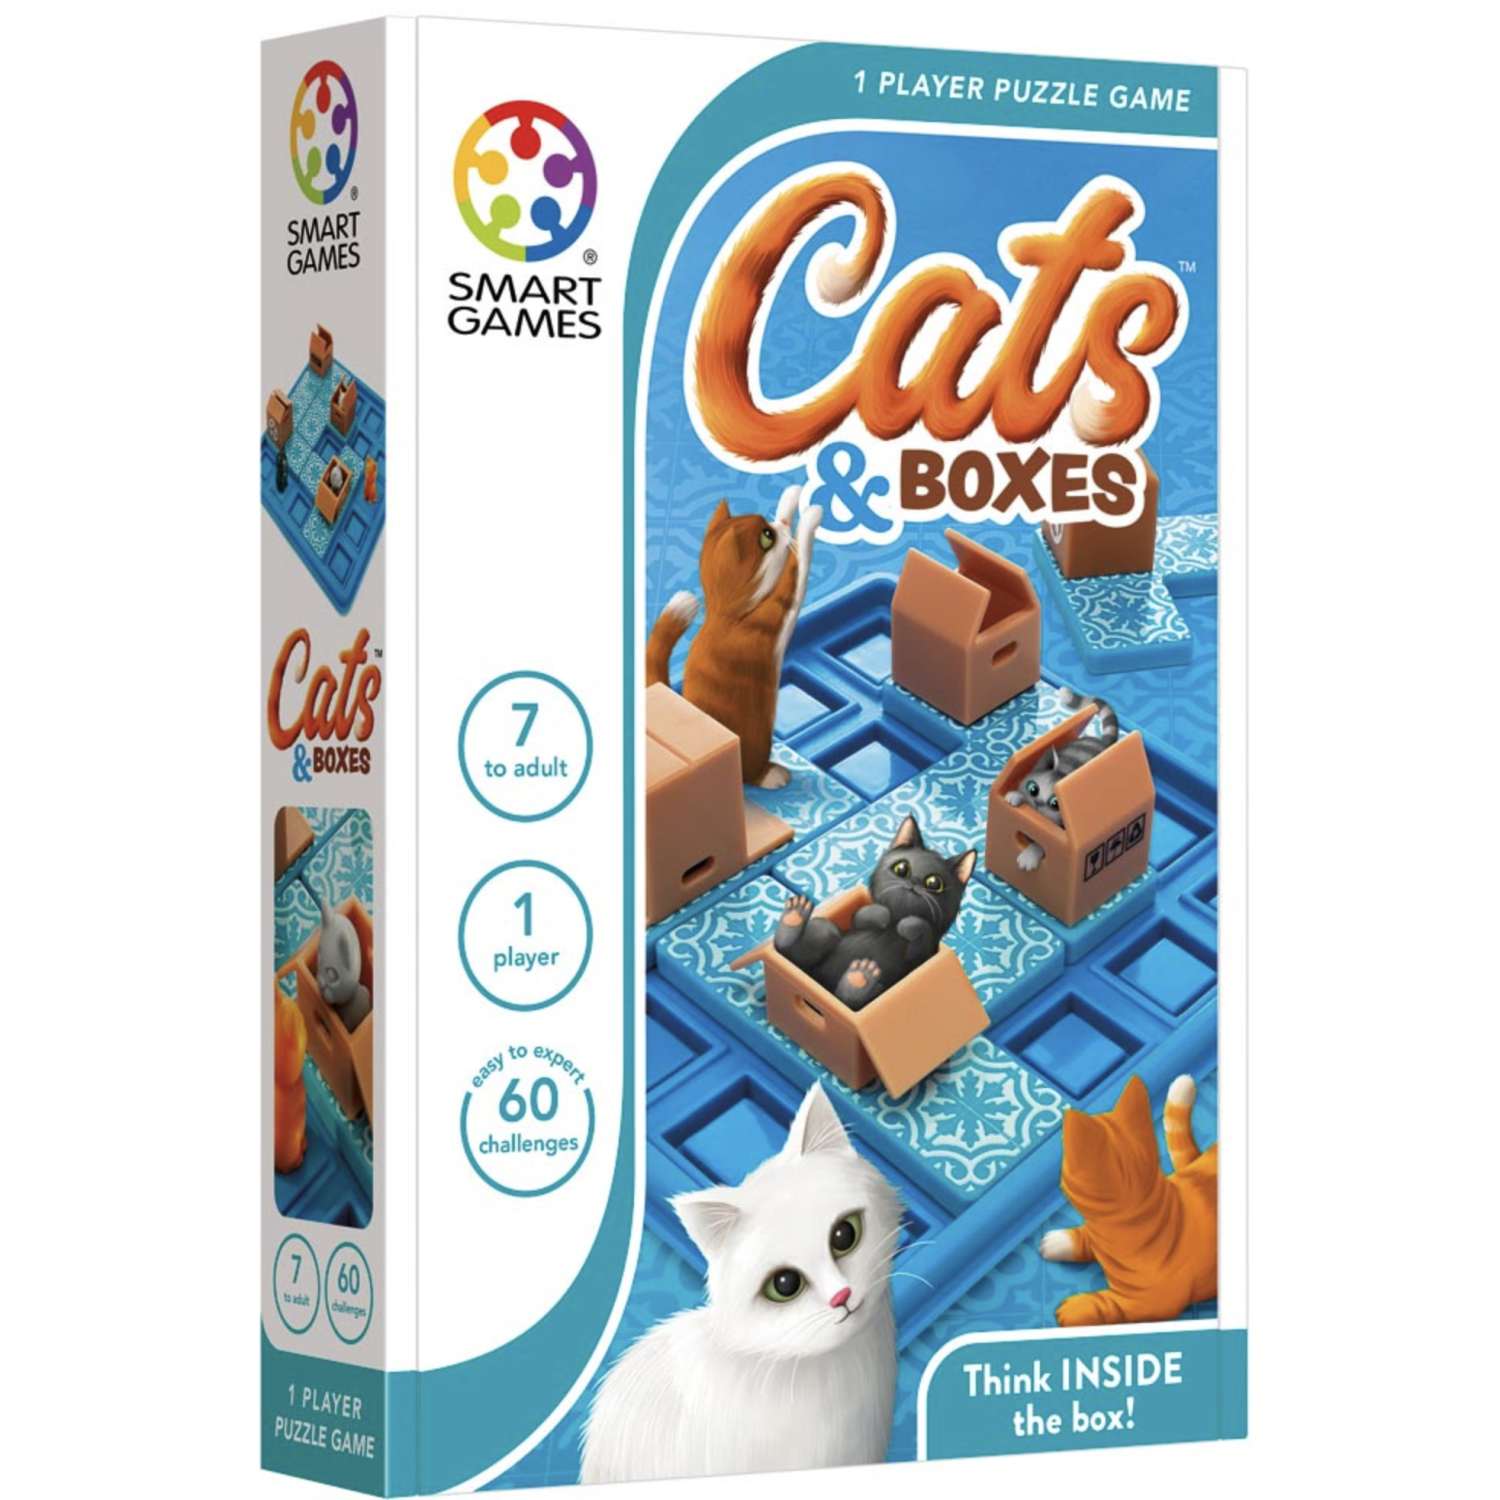 Cat Breeds Puzzle  Biology Learning Game